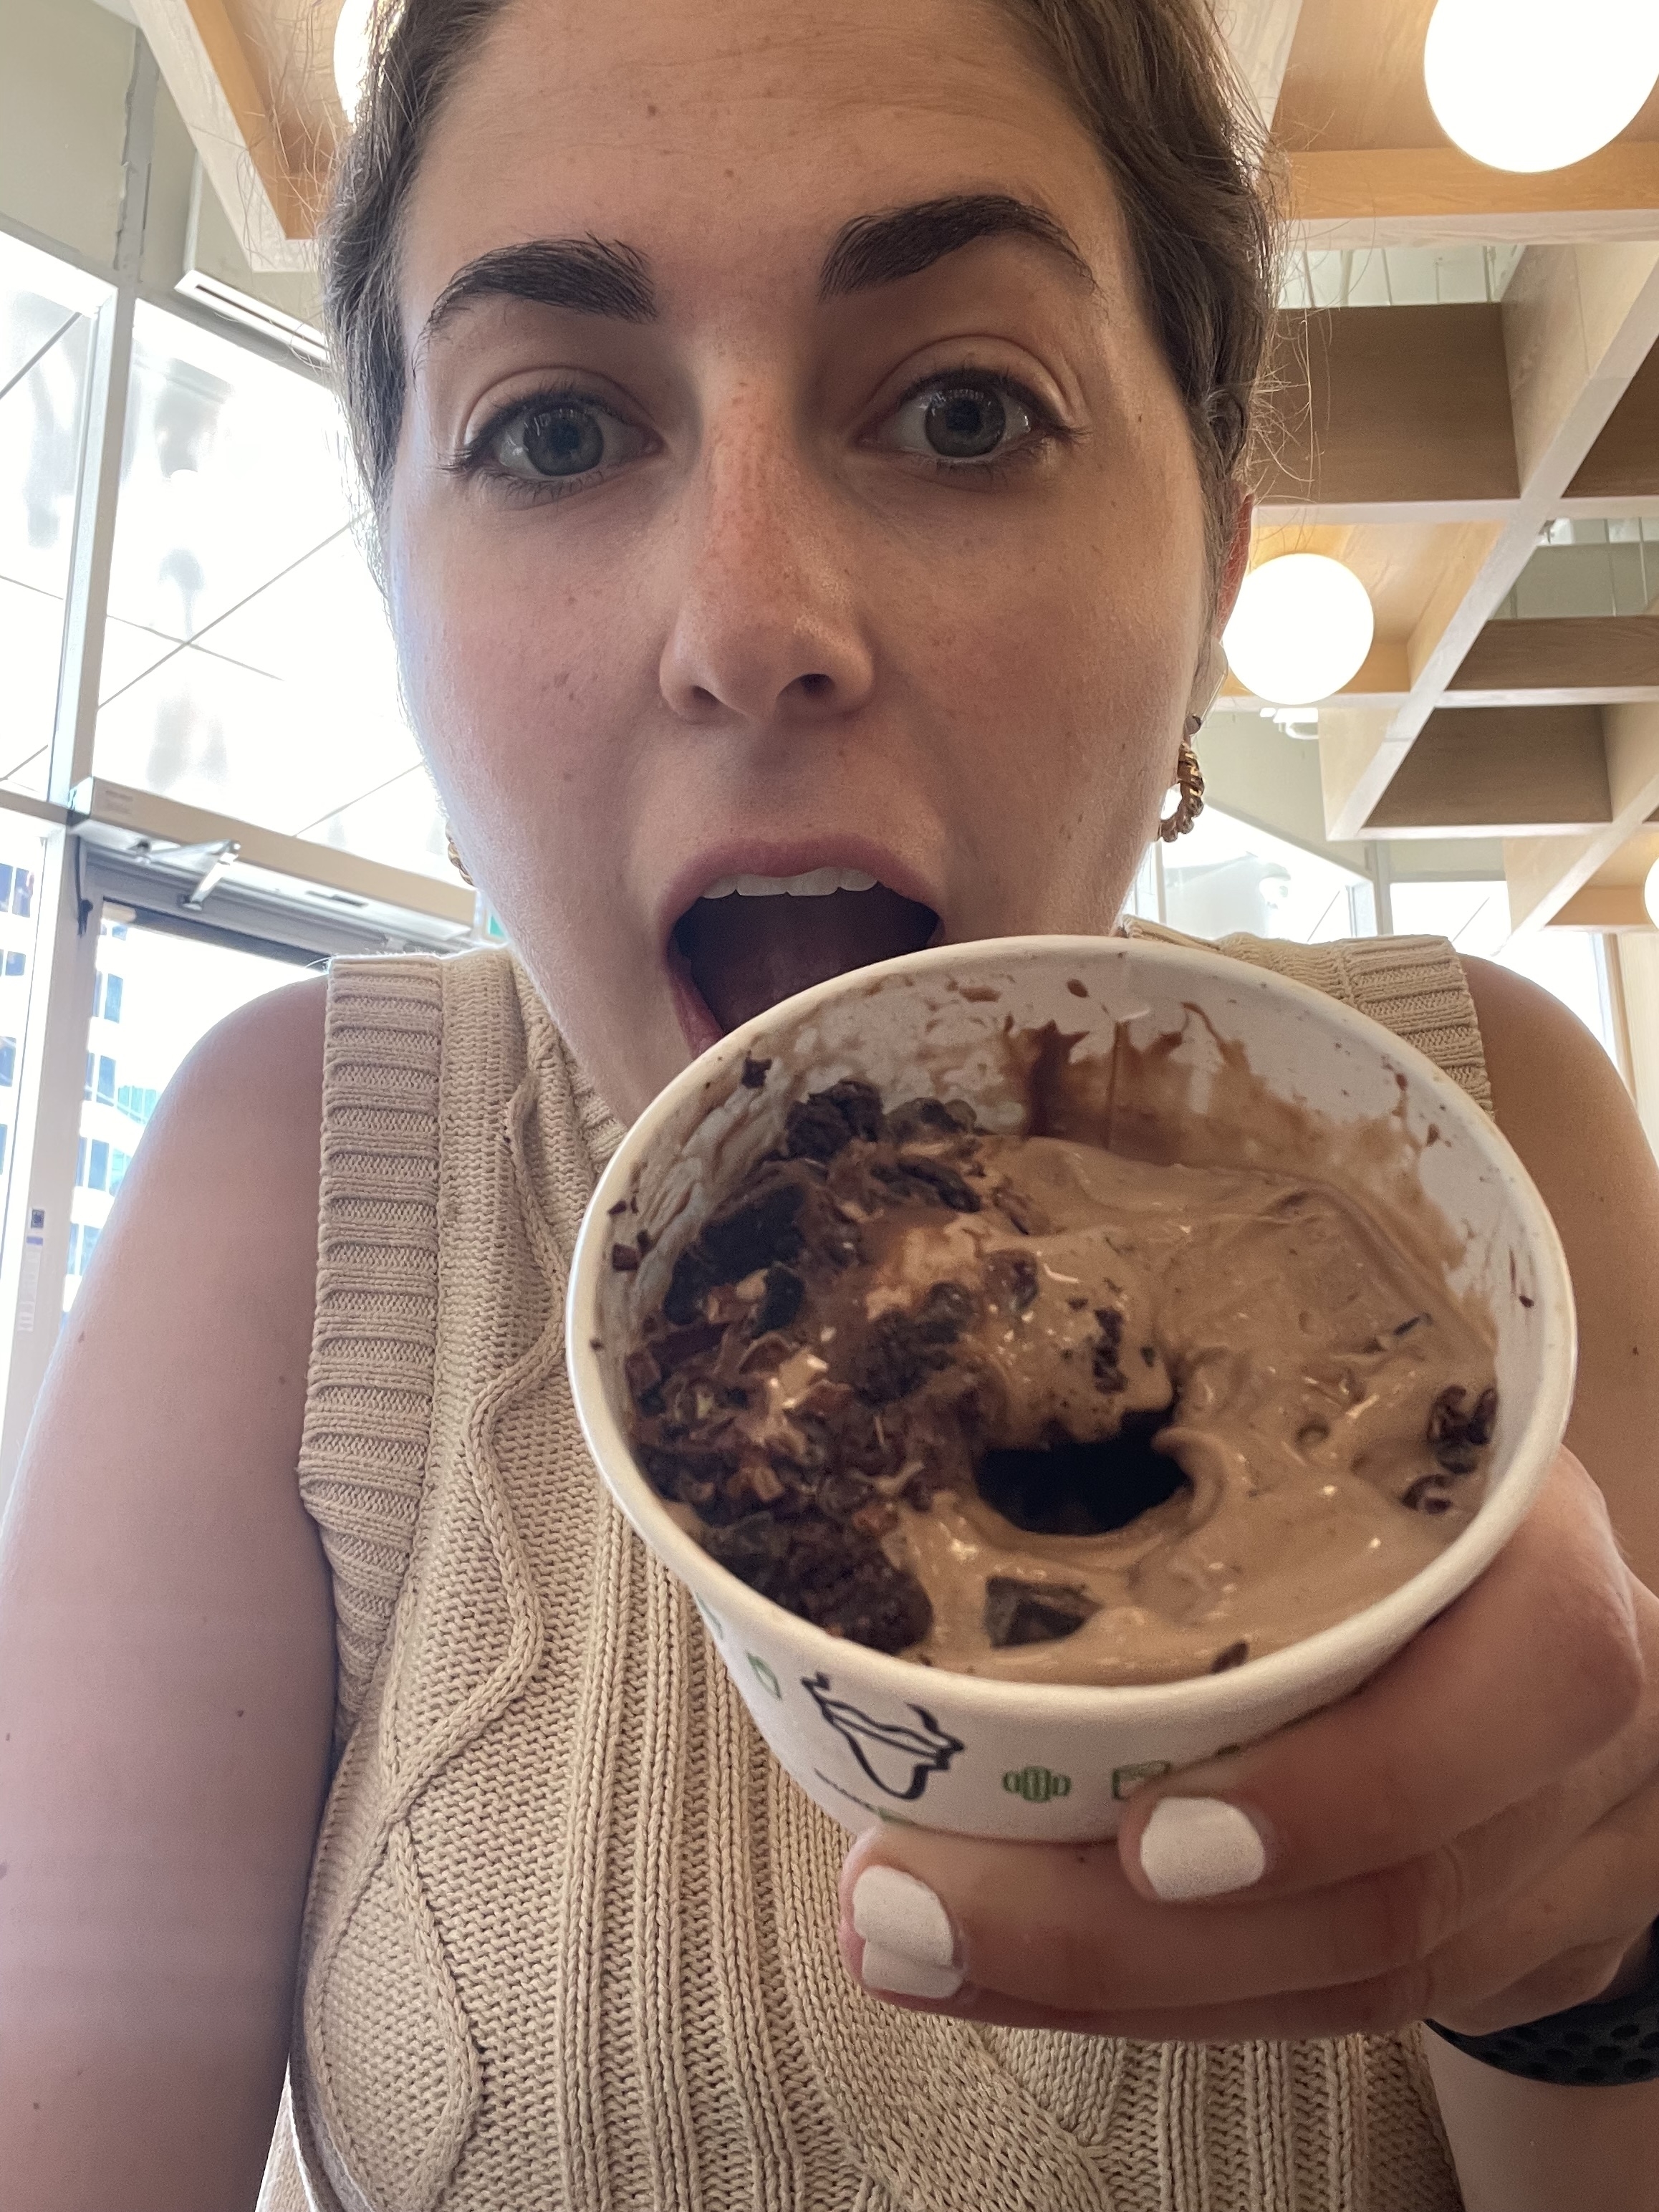 A woman in a knitted top holds a cup of chocolate ice cream with chocolate toppings, looking excited to take a bite